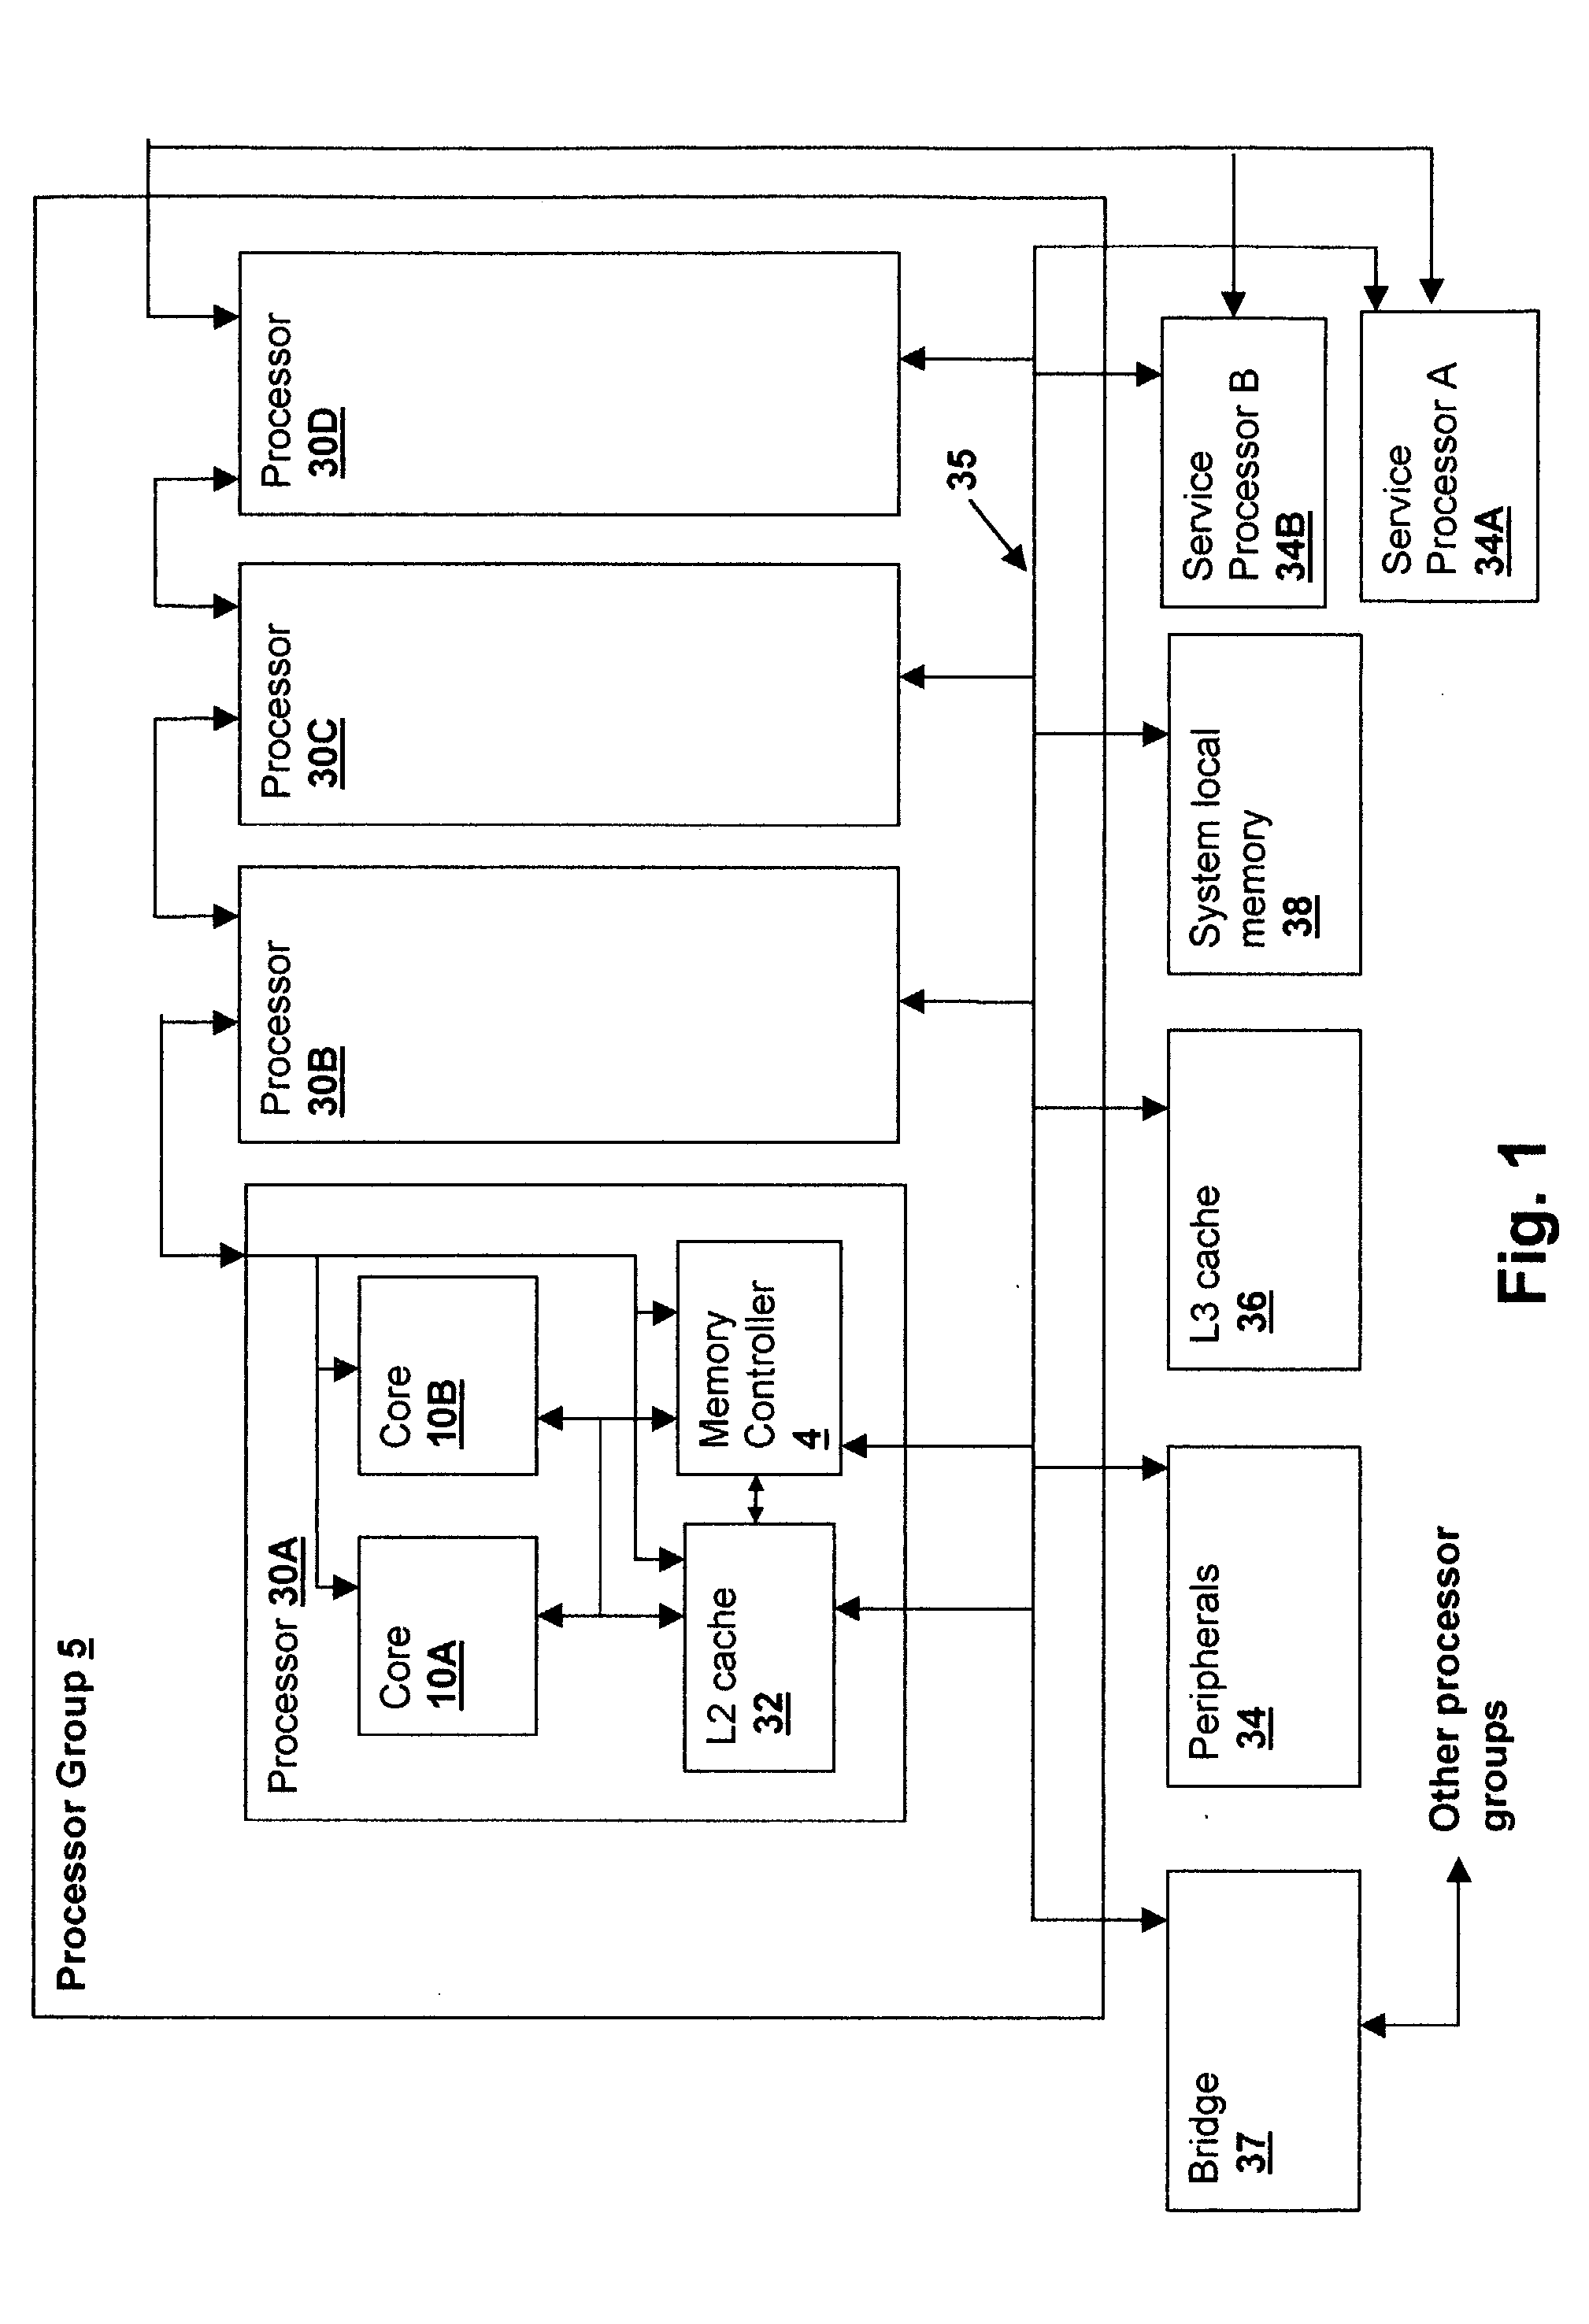 Method and apparatus for sending thread-execution-state-sensitive supervisory commands to a simultaneous multi-threaded (SMT) processor